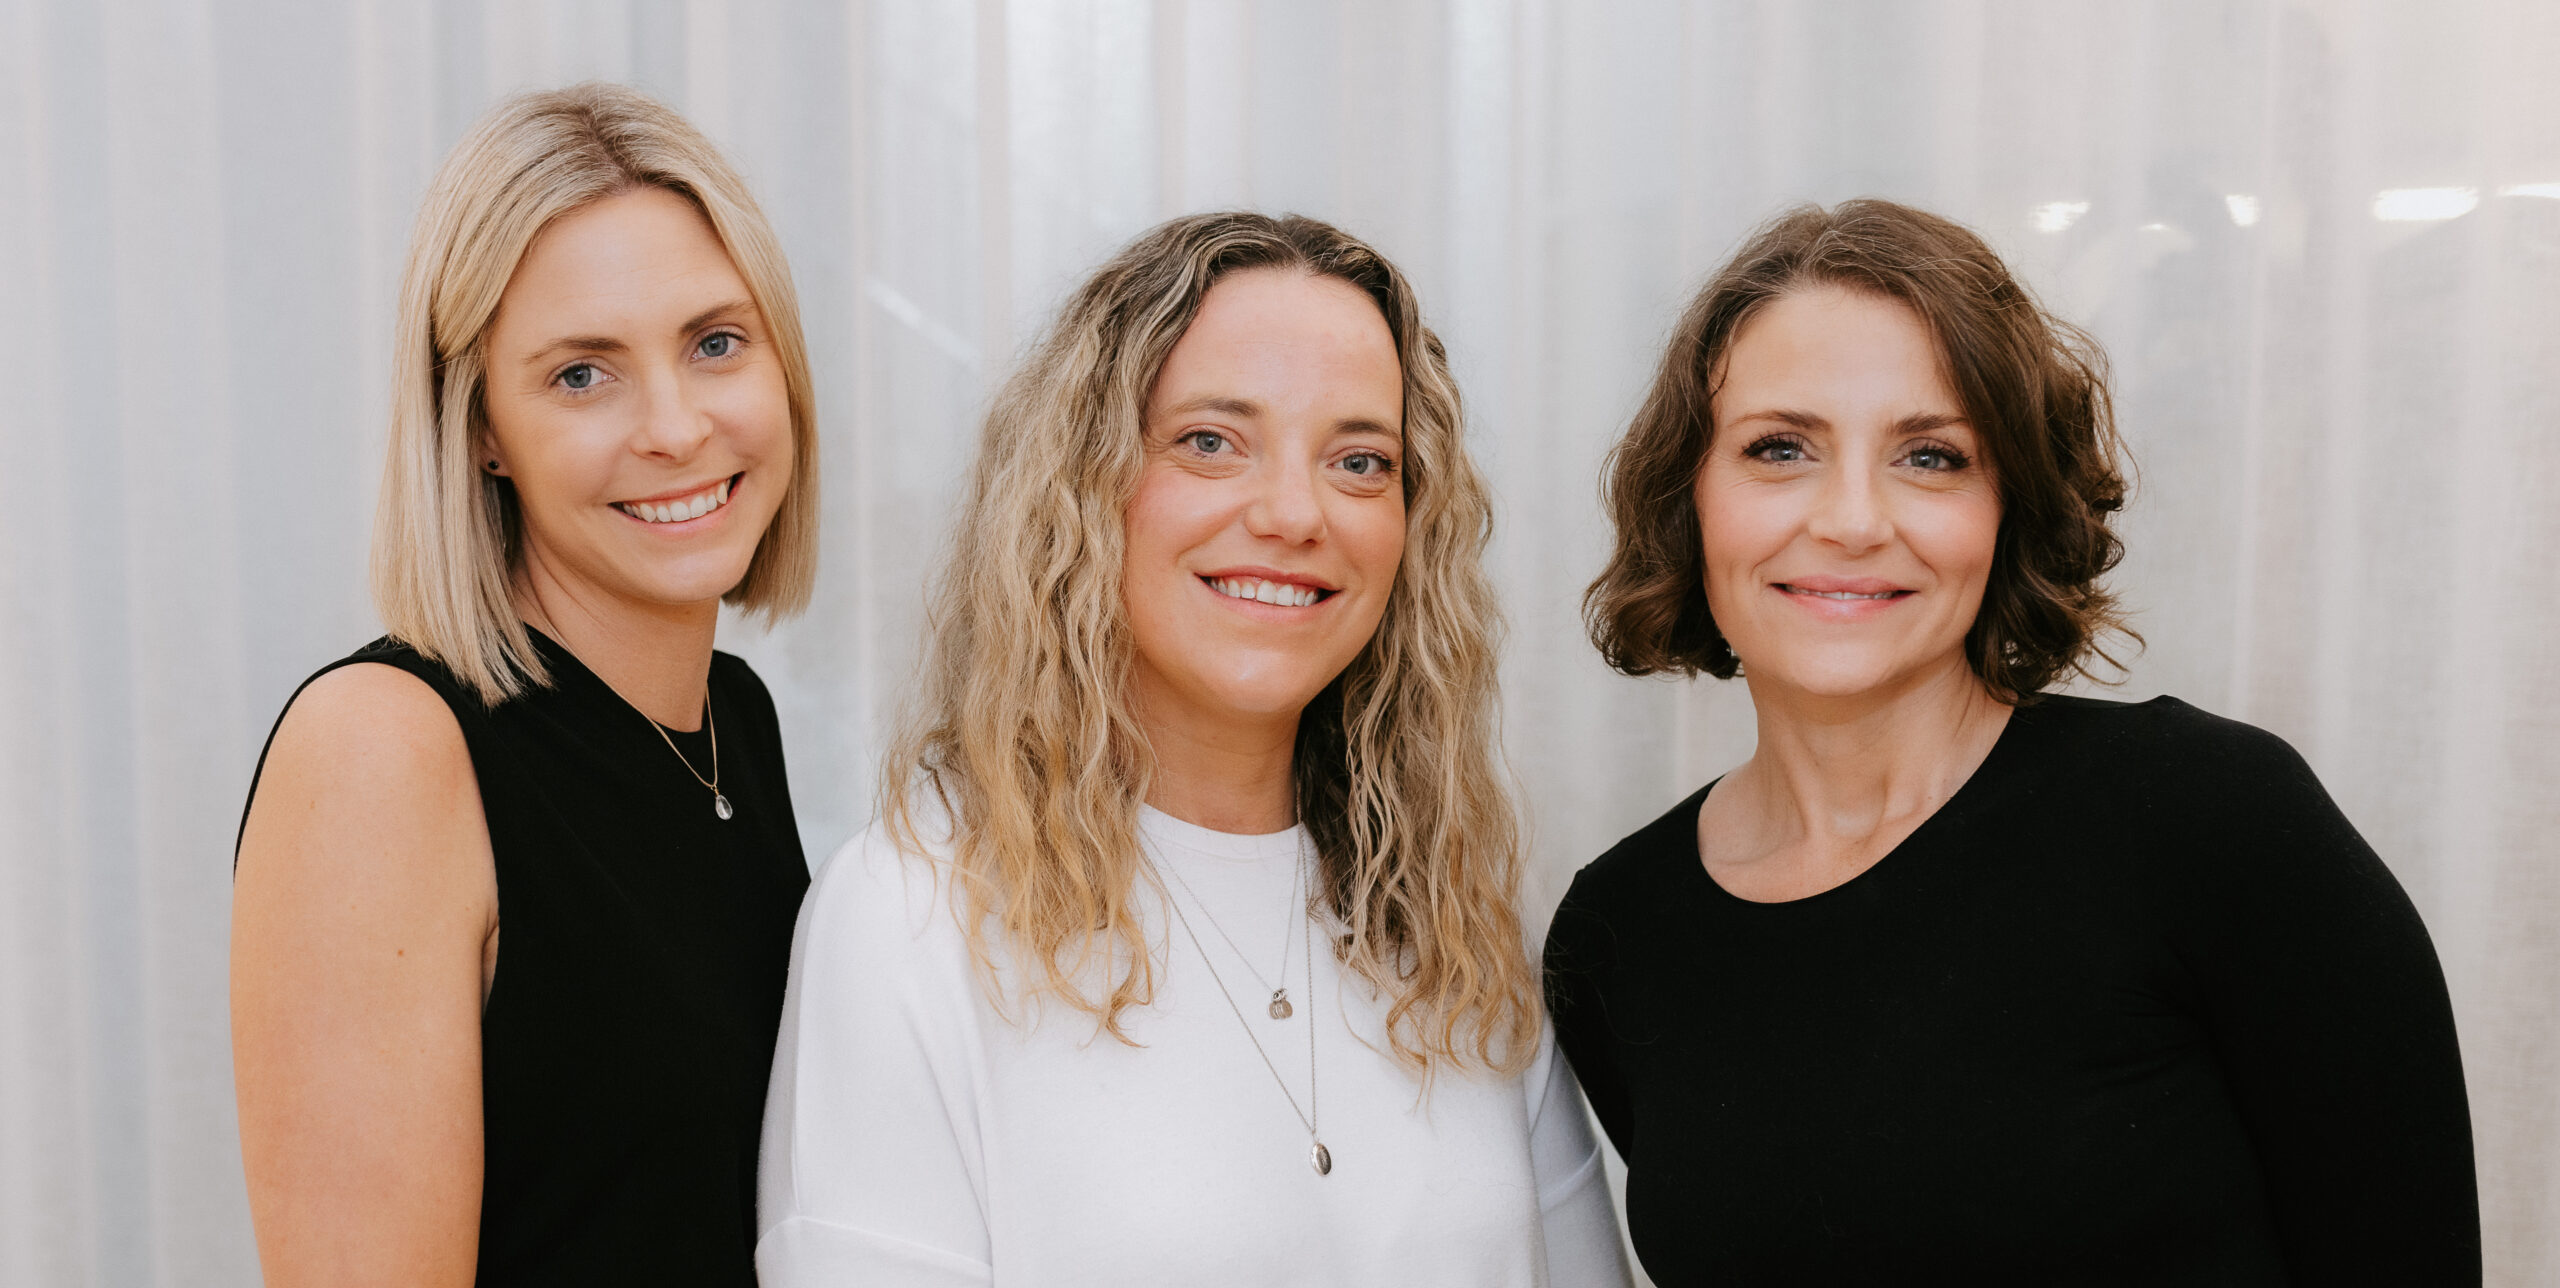 three naturopaths standing next to each other smiling at the camera